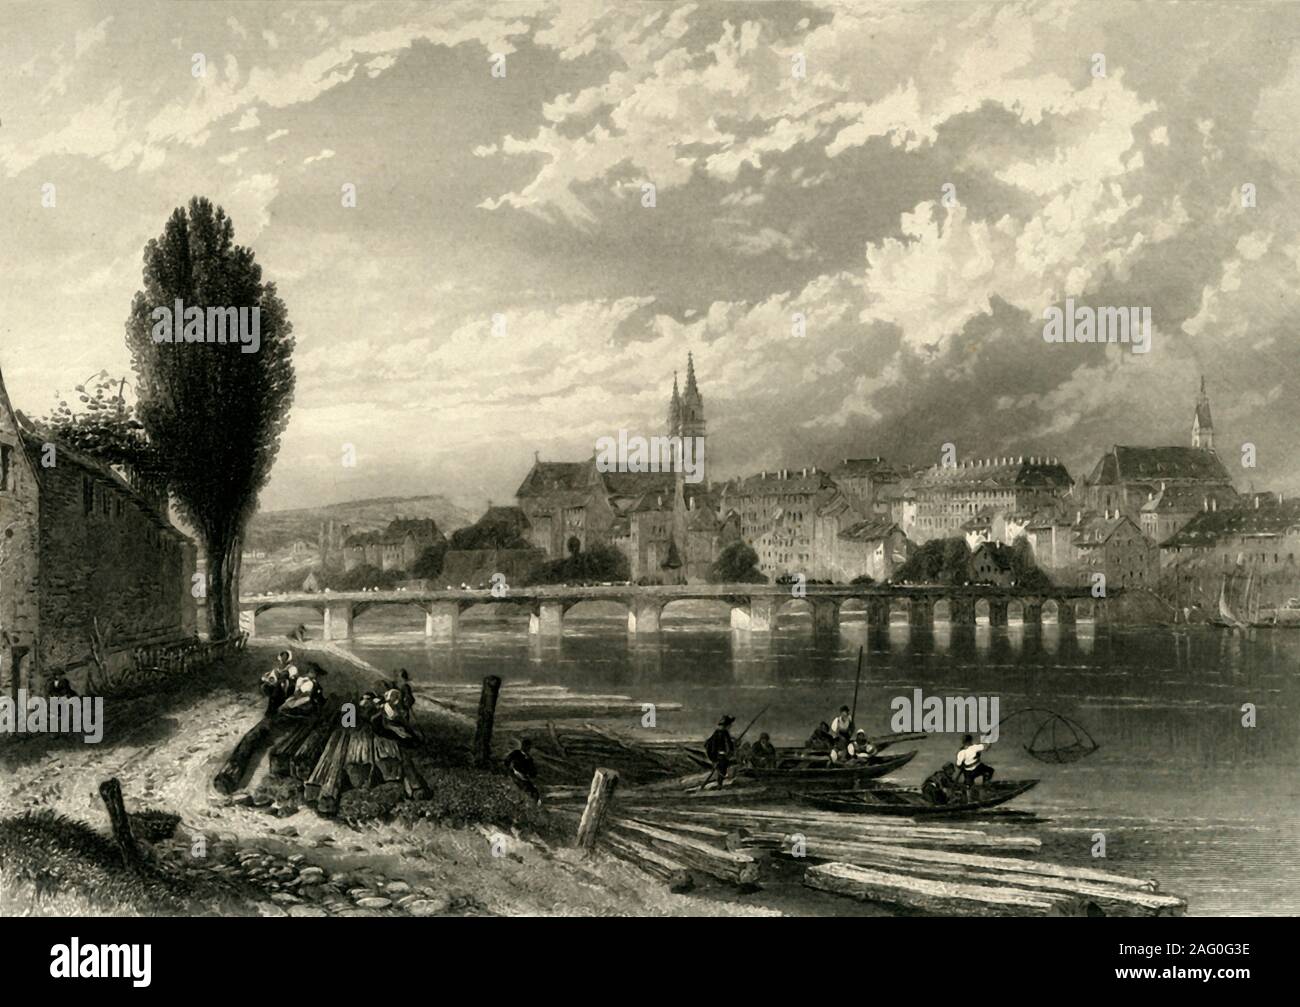 'Basle', c1872. View of the city of Basel in Switzerland. In the centre is the Middle Bridge over the River Rhine, with Basel Minster beyond. From &quot;The Franco-Prussian War: its causes, incidents and consequences&quot;, Volume II, by Captain H M Hozier. [William Mackenzie, London, 1872] Stock Photo